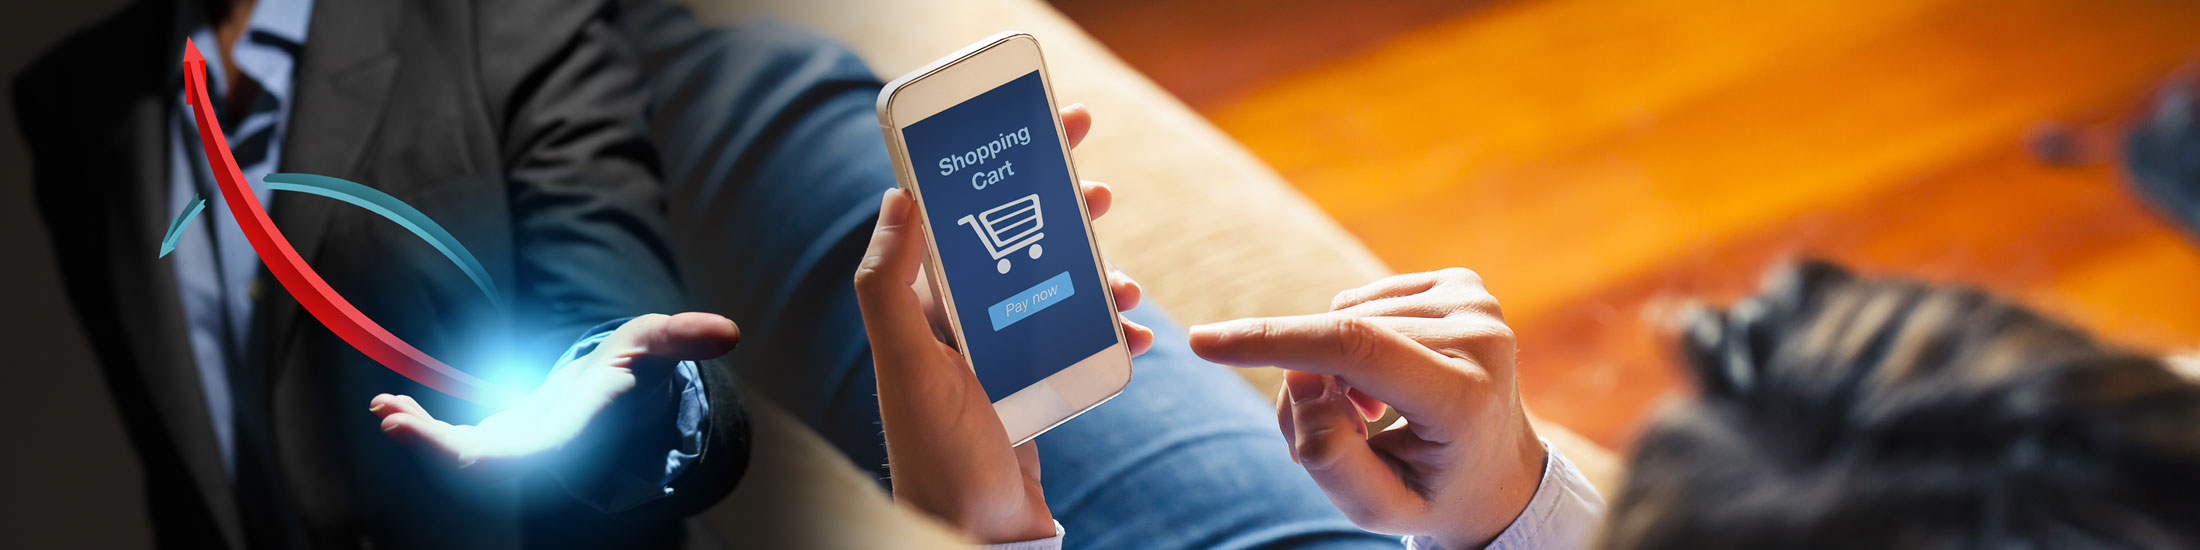 E-Commerce Sales Rise 81% in May, Chargebacks Remain Troublesome